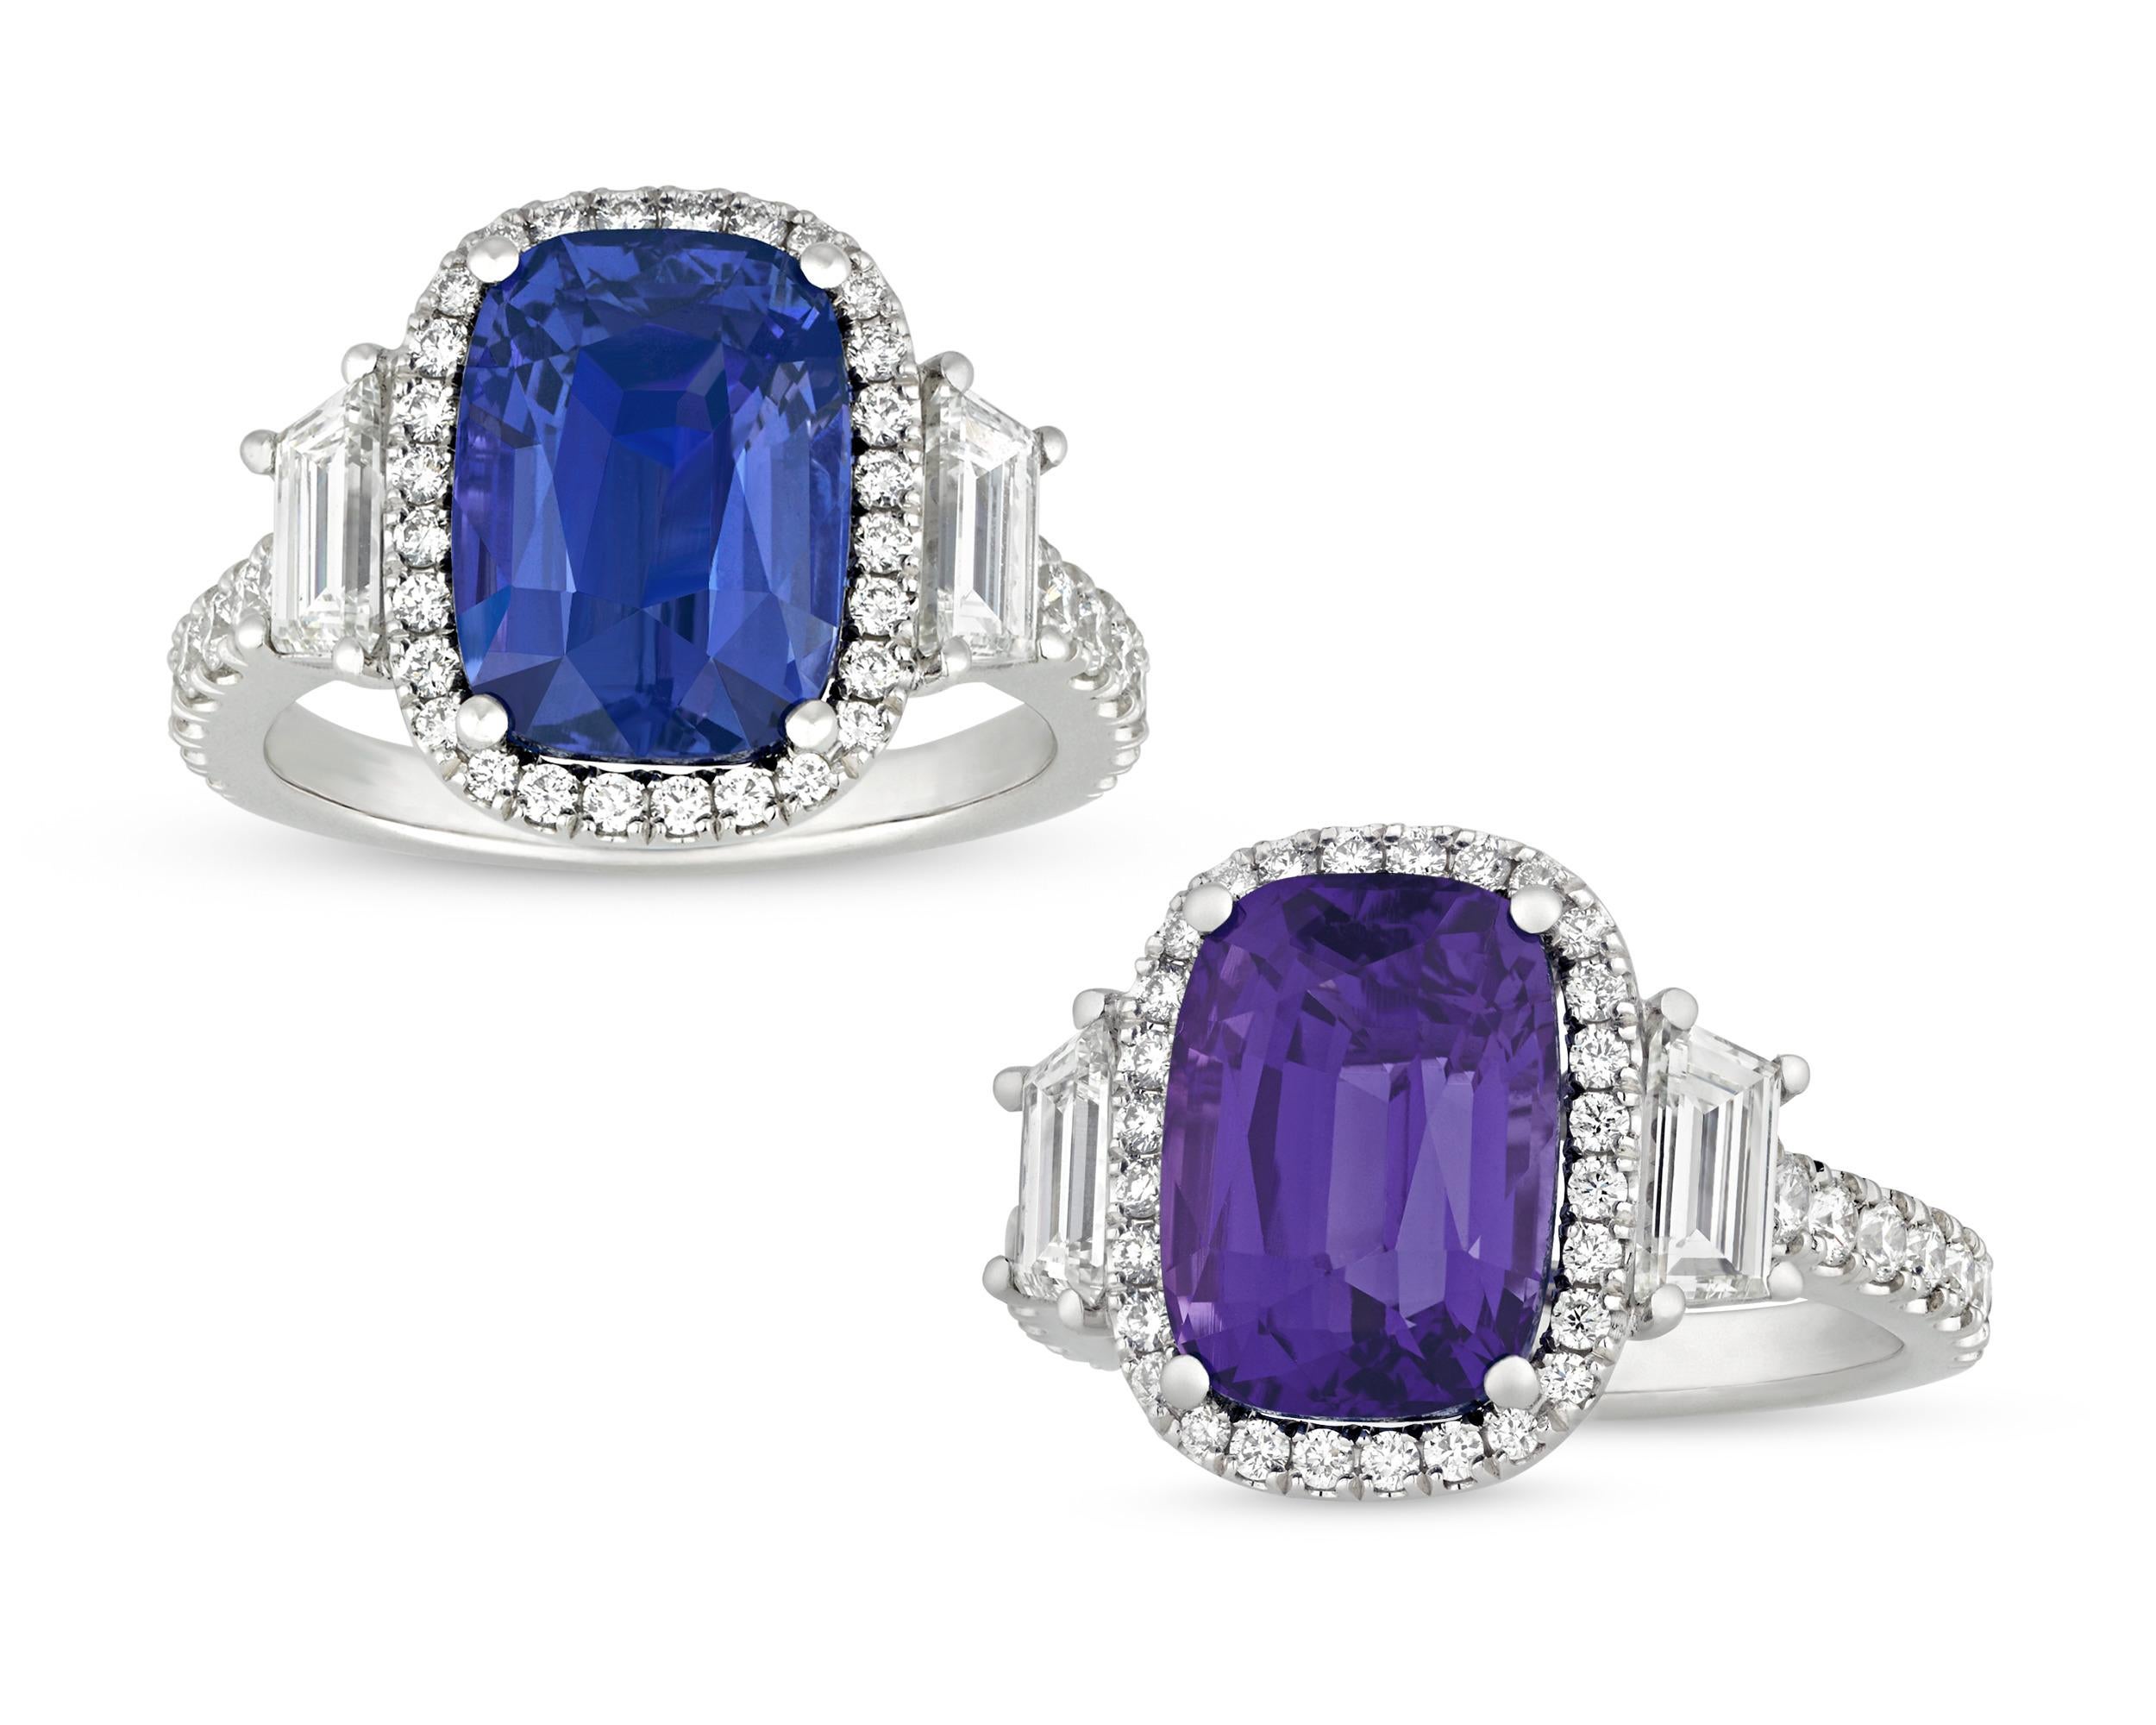 The color-changing sapphire in this eye-catching ring boasts not one, but two incredible hues. The extraordinary stone displays a traditional blue color when viewed in fluorescent light and an equally stunning purple hue when viewed in incandescent